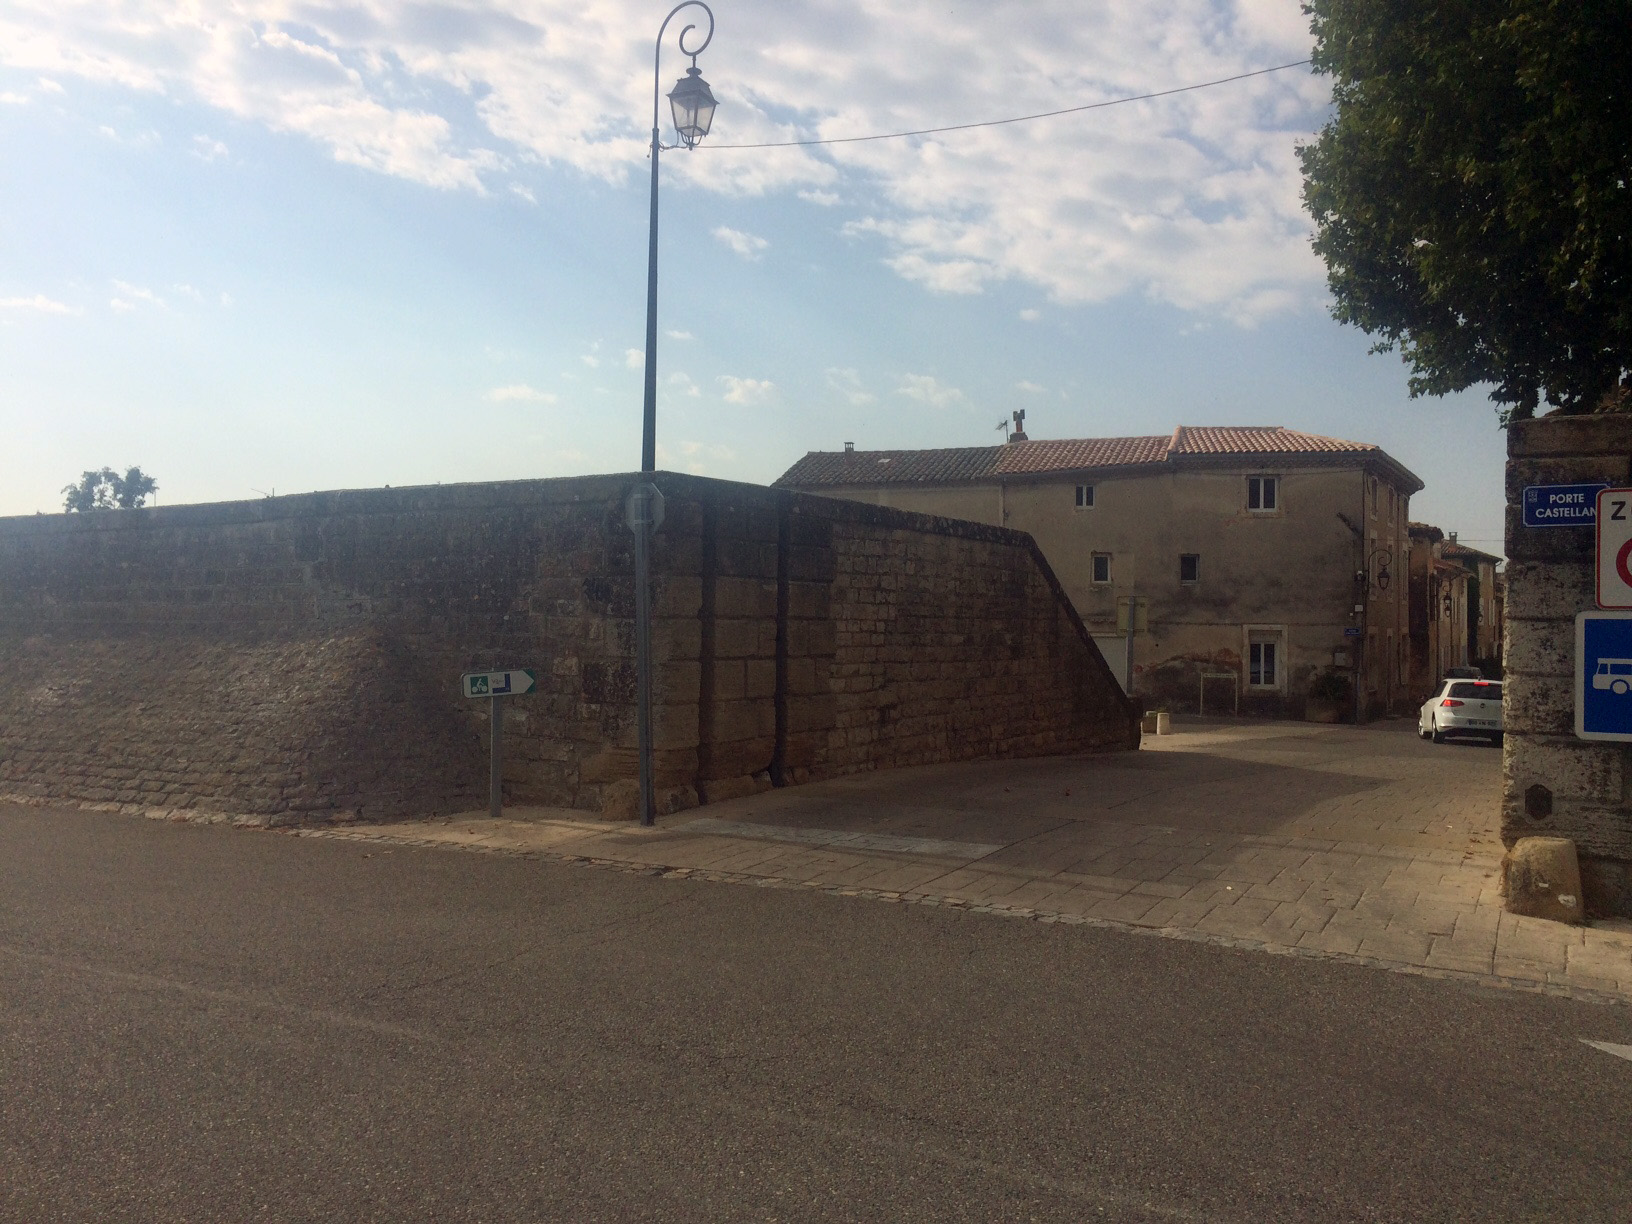 Village circled by old style flood defences from the Rhône.